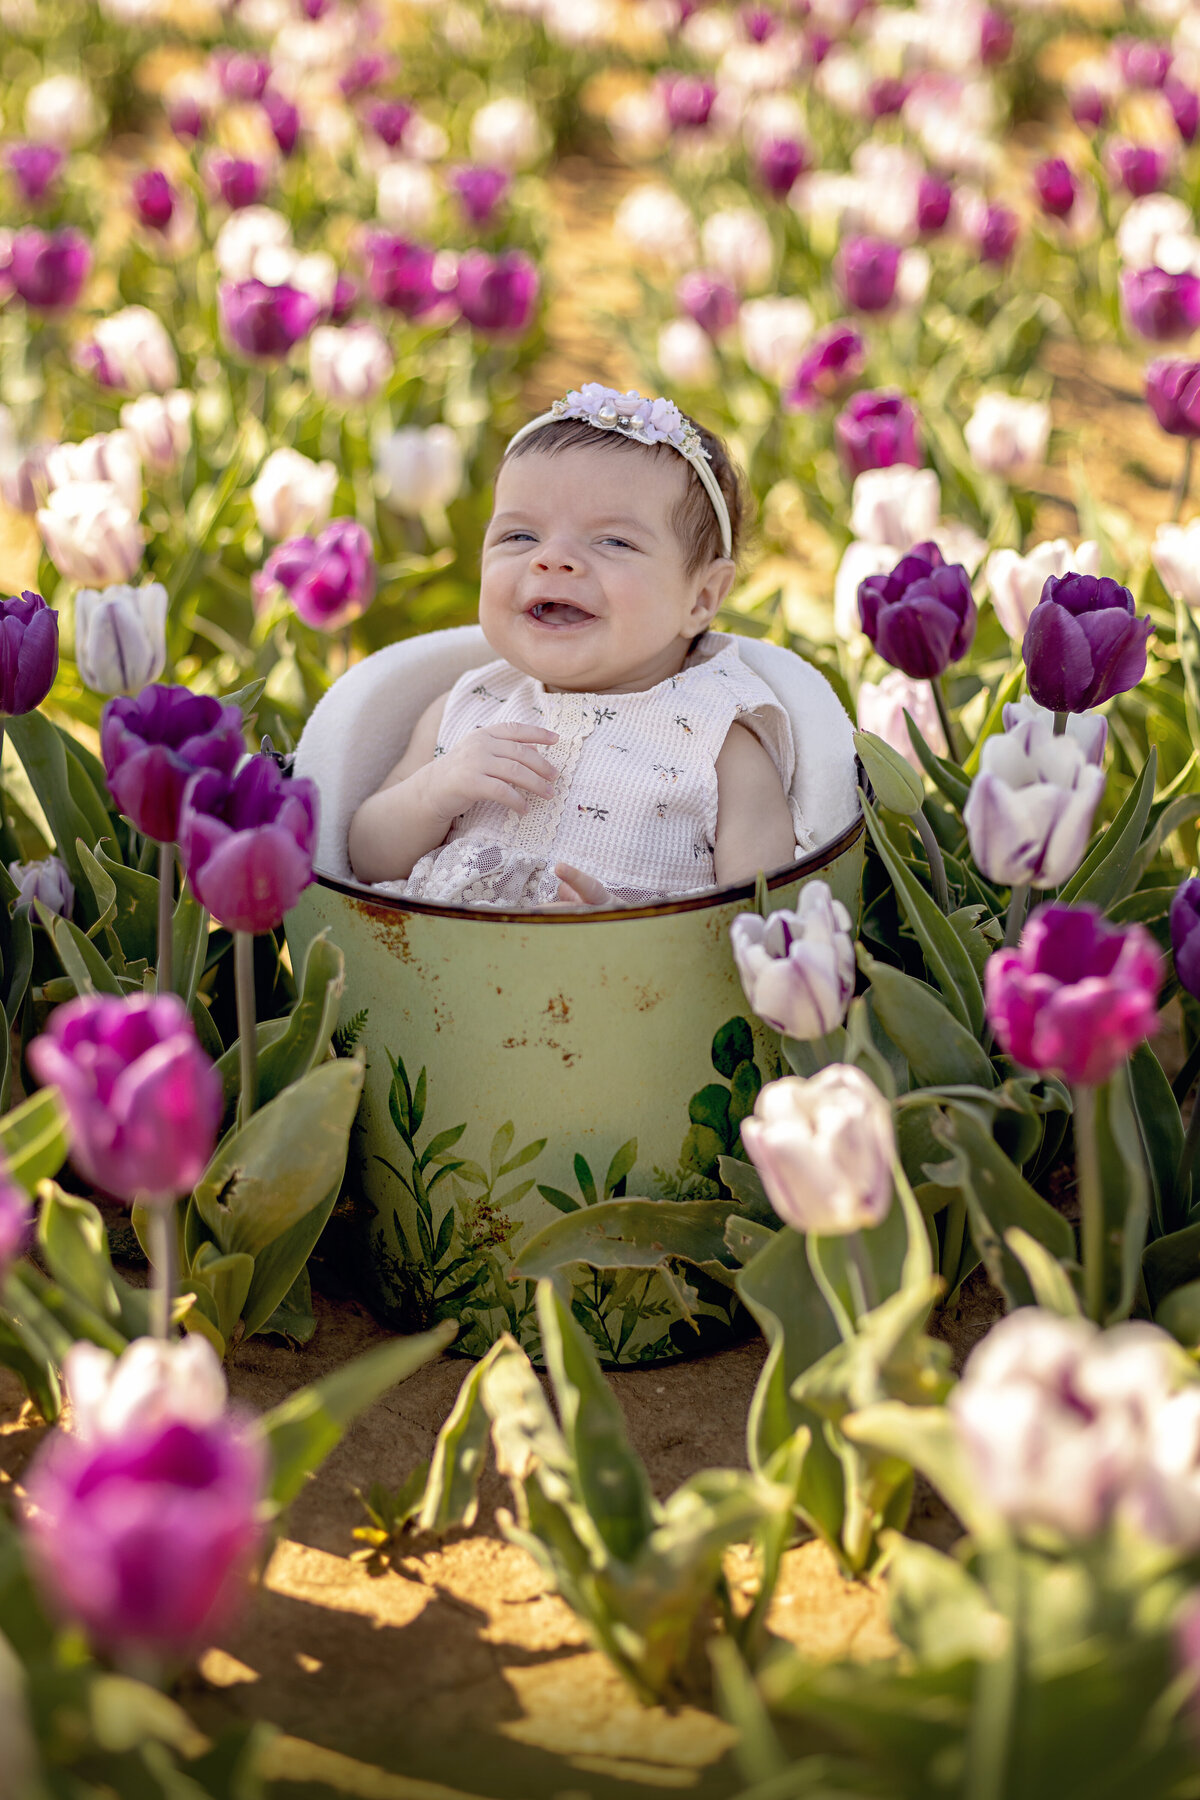 A happy infant girl in a white dress and floral headband smiles while sitting in a bucket in a field of tulips